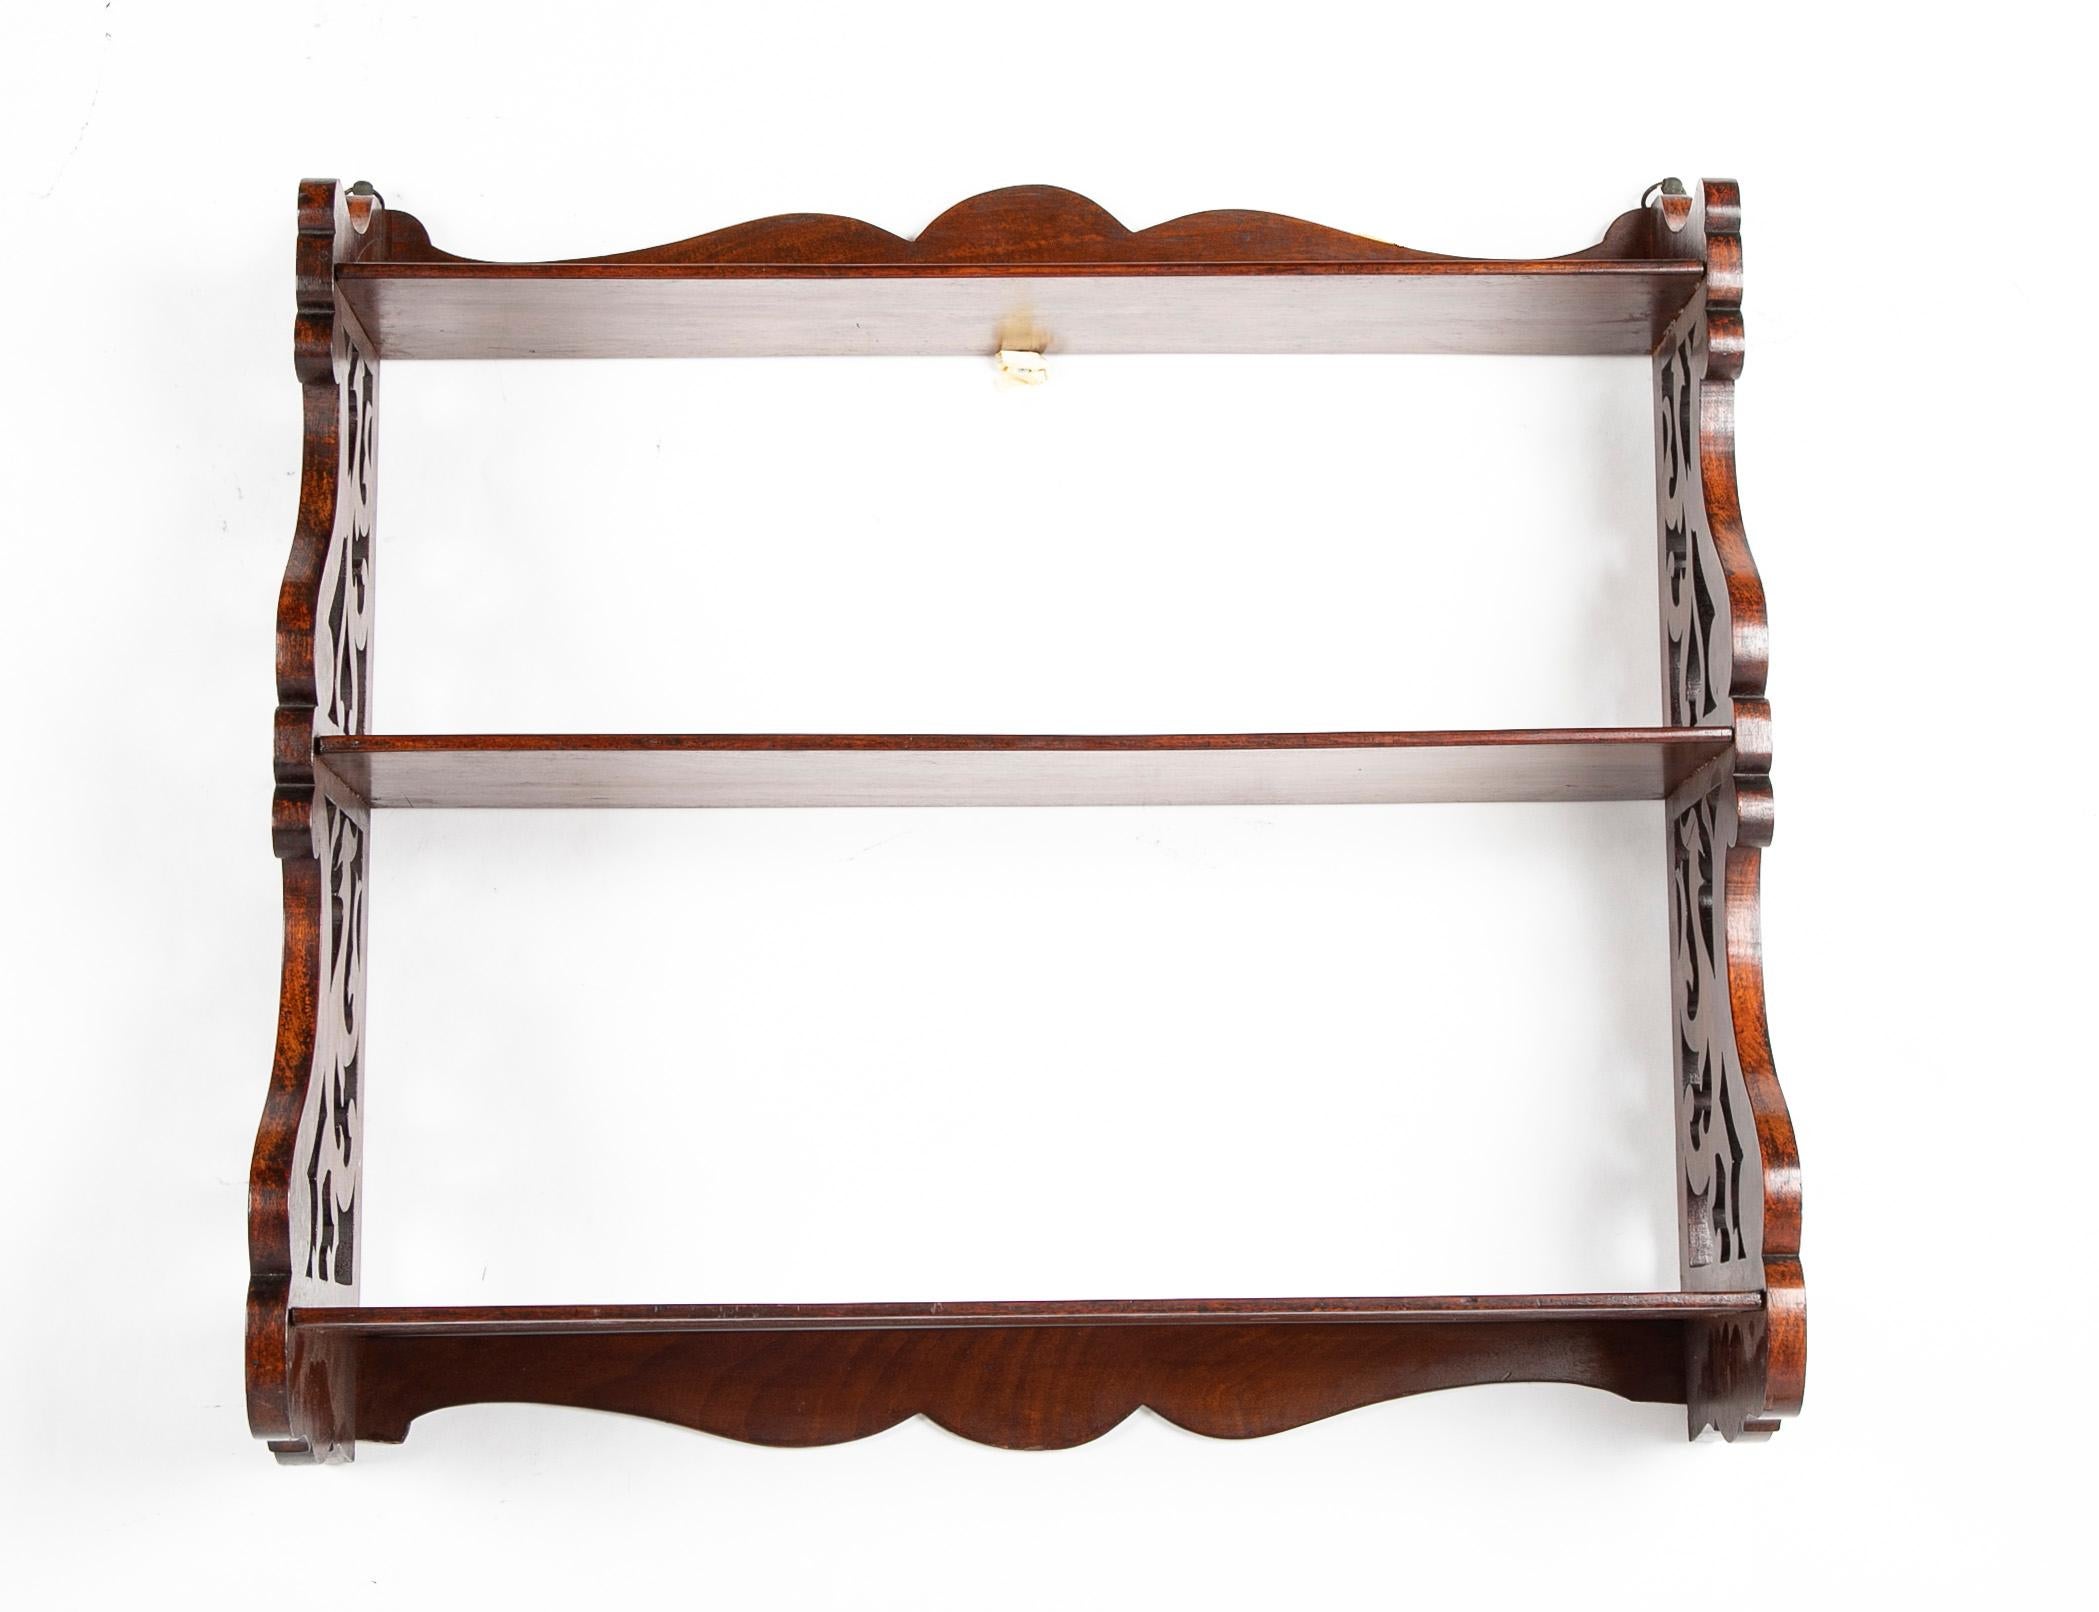 19th Century English Regency mahogany hanging shelf with three tiers supported by carved fretwork sides depicting stylized birds. A handsome and sturdy addition to your den as a bookshelf, pantry, kitchen or anyplace a small useful shelf would be